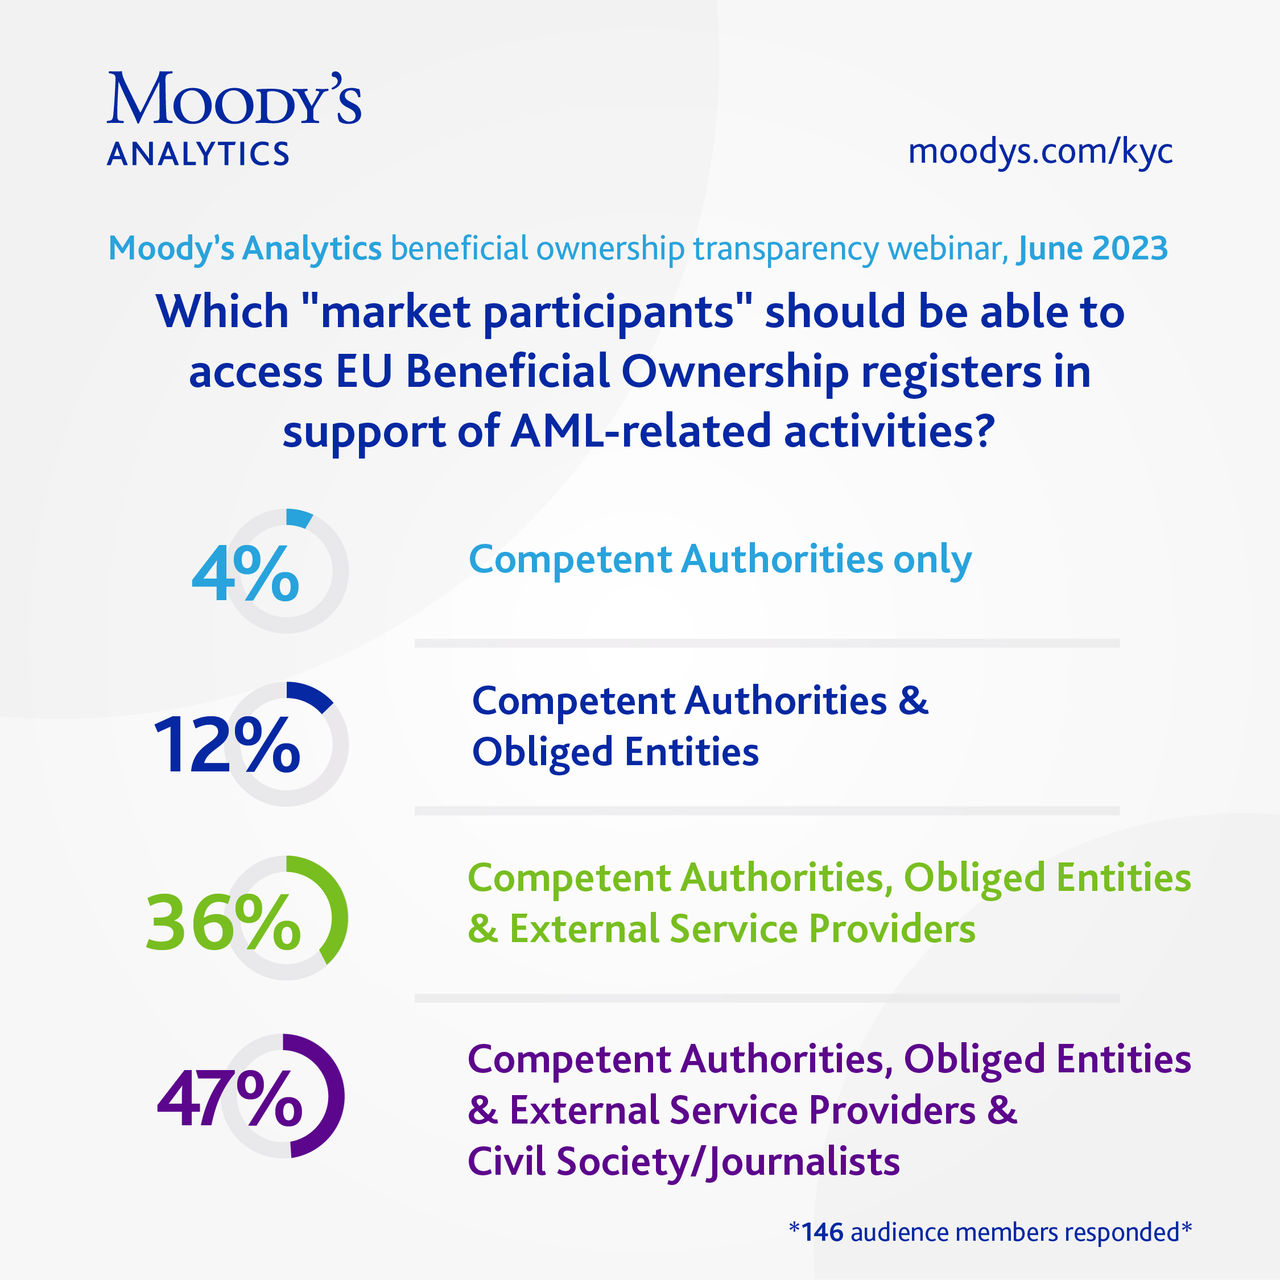 Which "market participants" should be able to access EU Beneficial Ownership registers in support of AML-related activities?